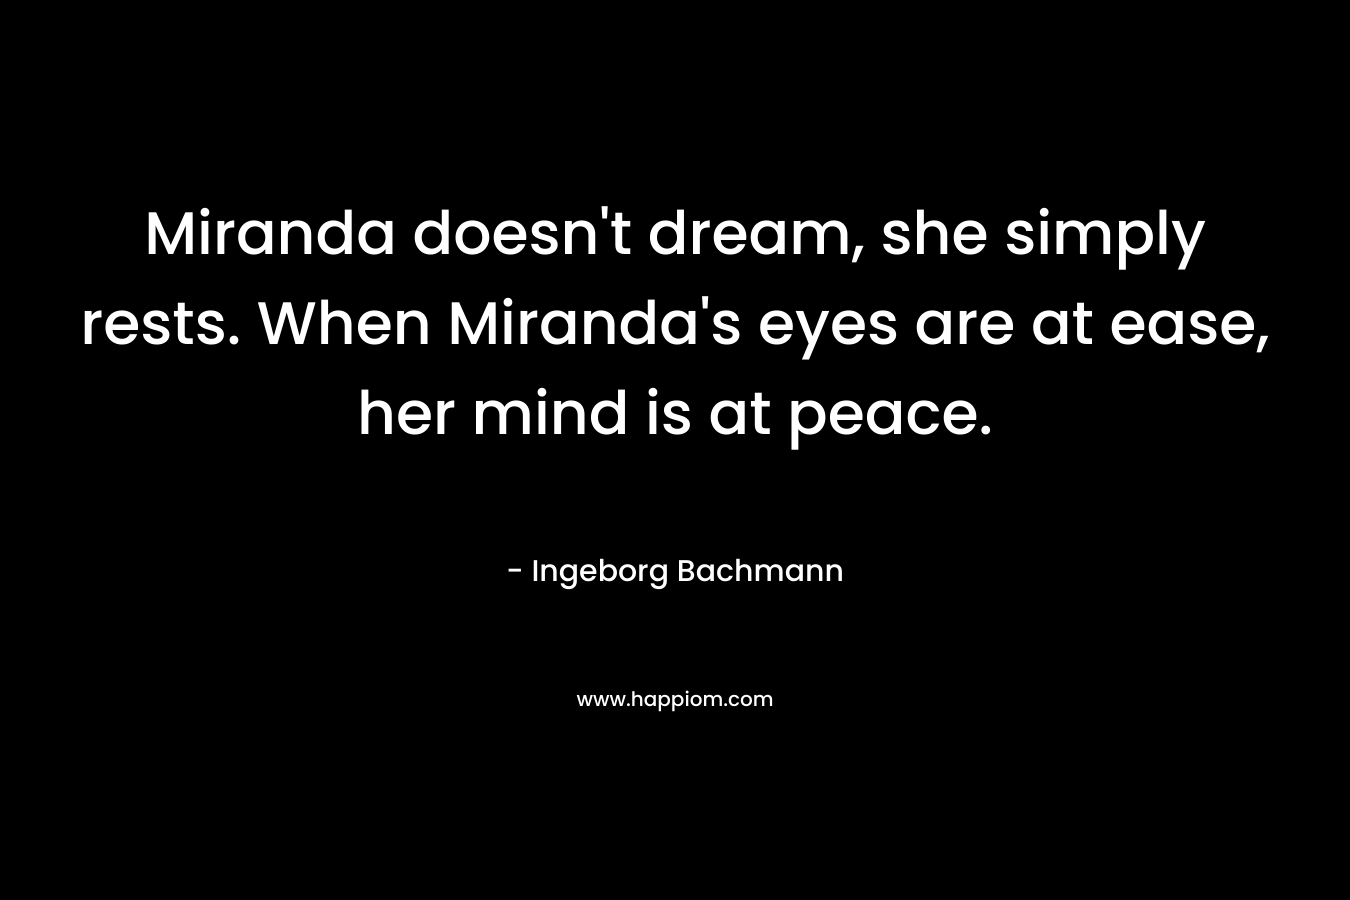 Miranda doesn't dream, she simply rests. When Miranda's eyes are at ease, her mind is at peace.